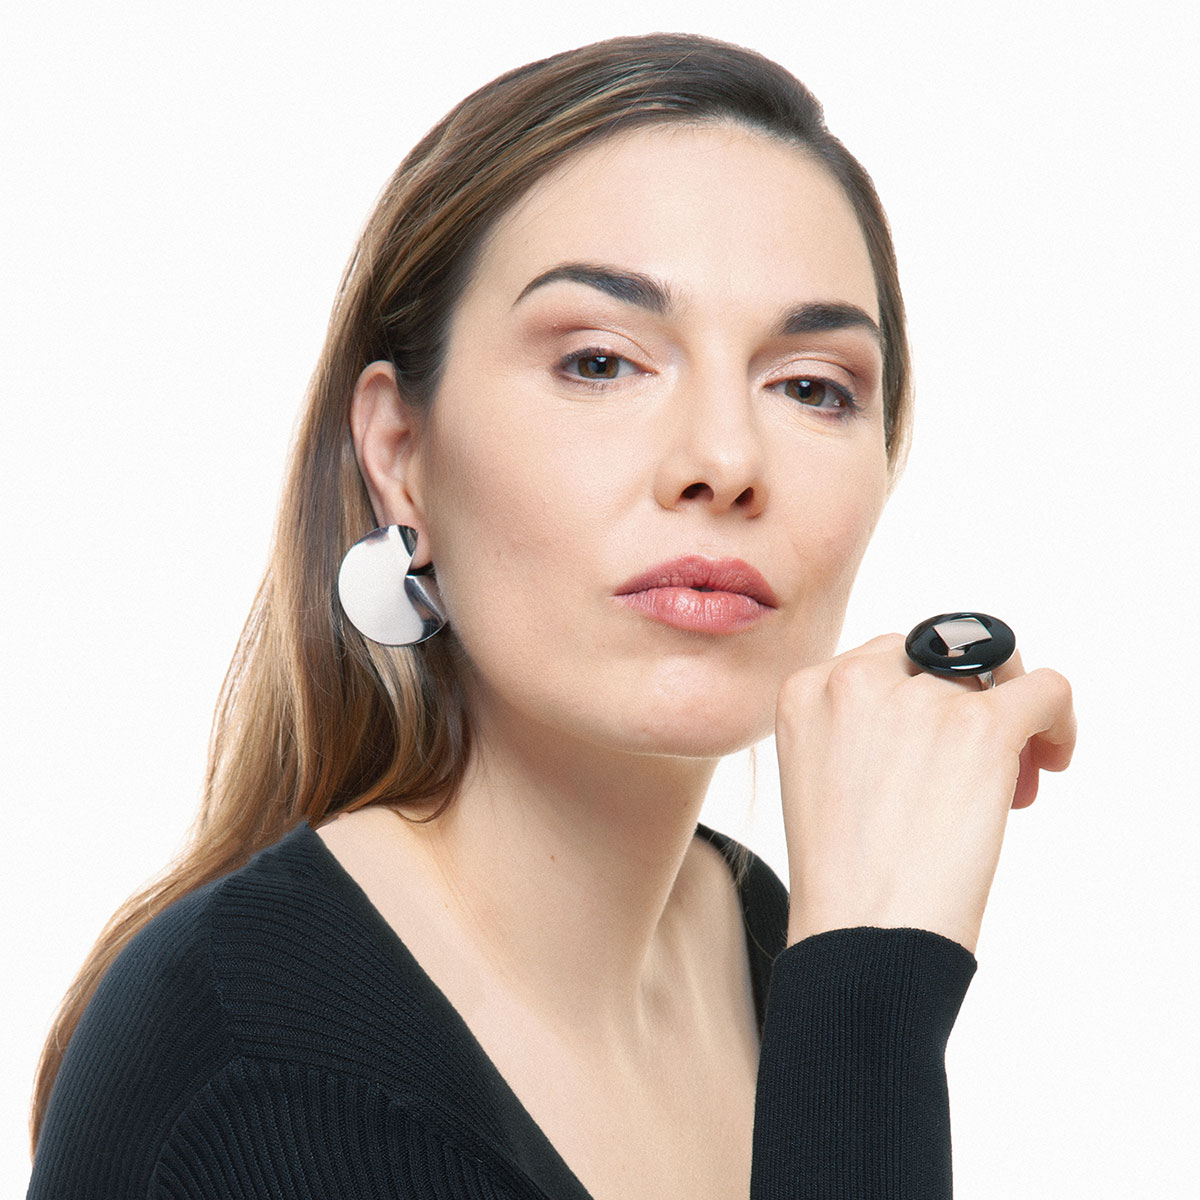 Yon handmade ring in sterling silver and onyx designed by Belen Bajo m2